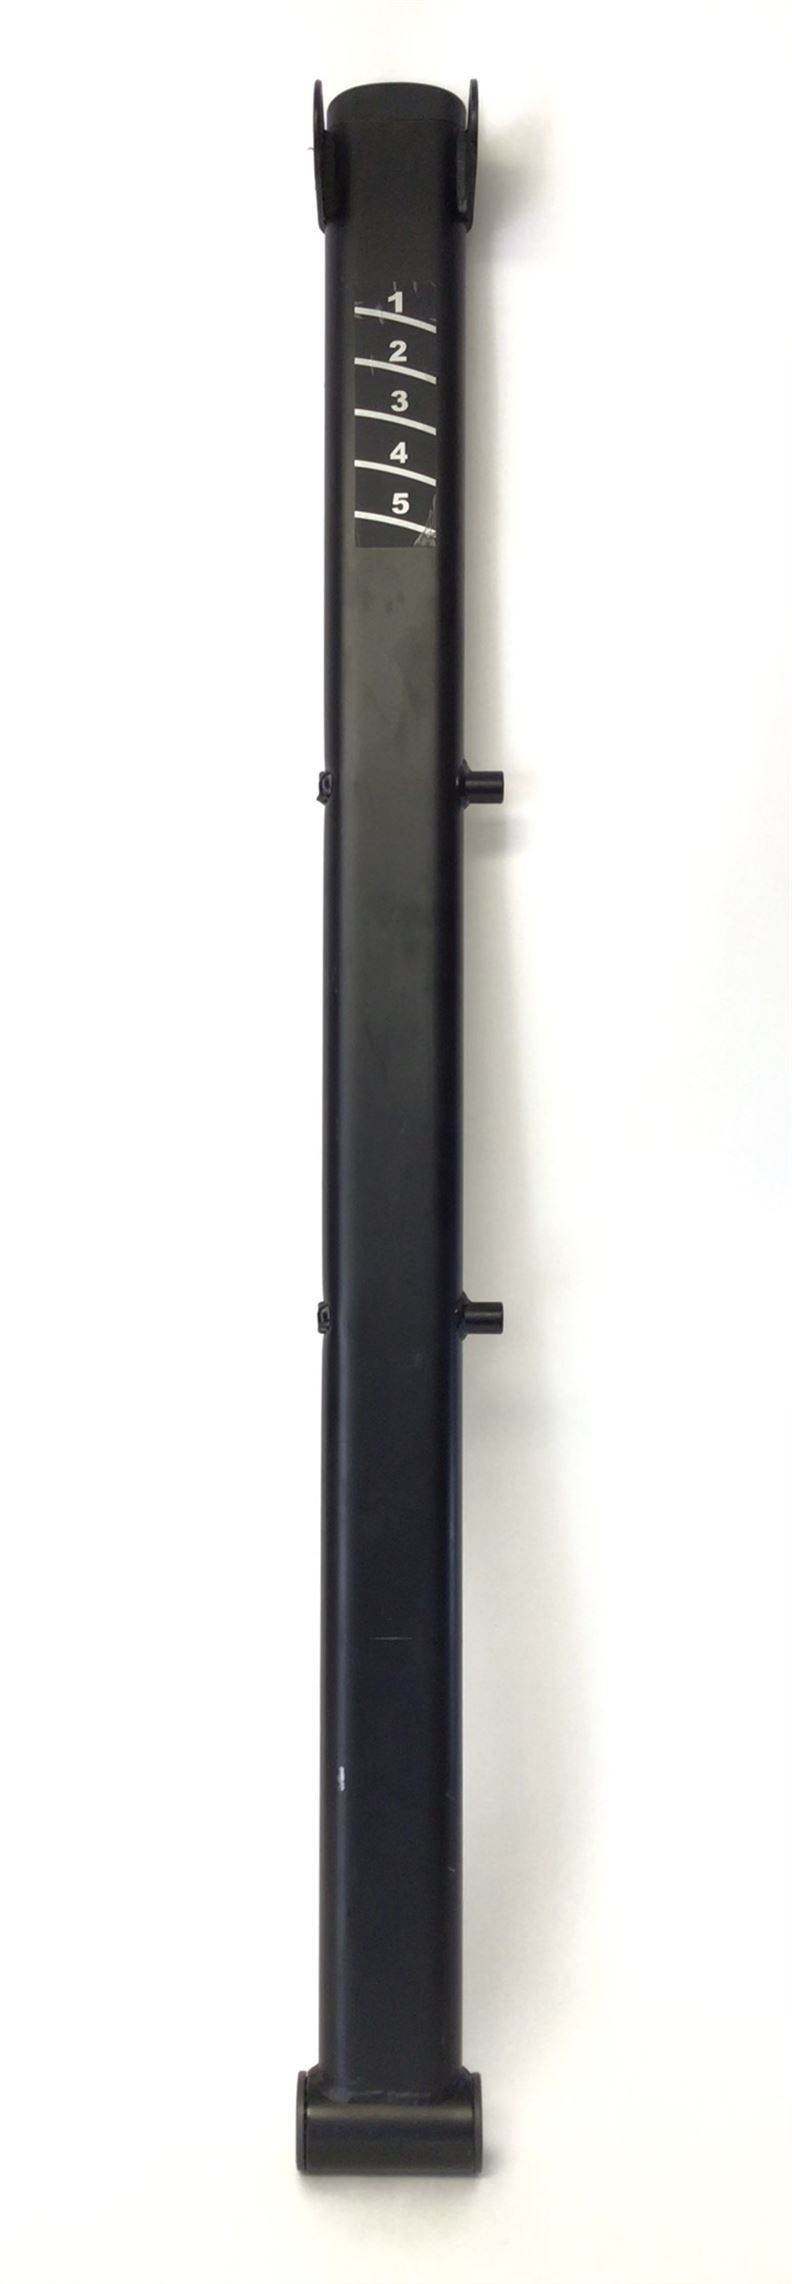 Right Foot Pedal Arm (Used)